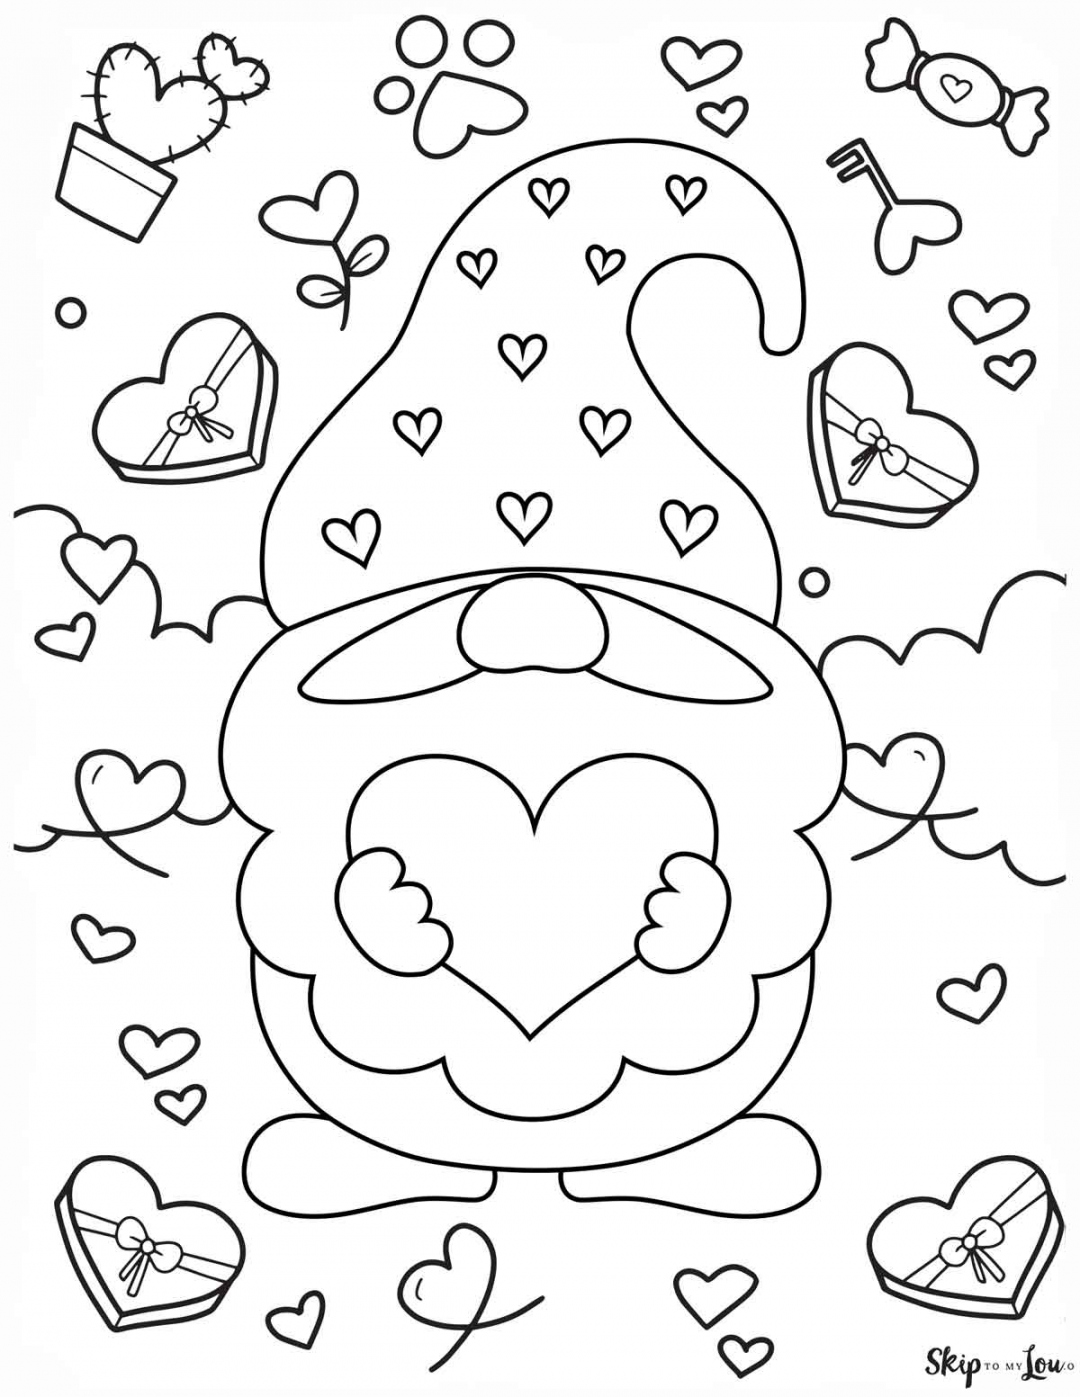 Free Printable Valentine Coloring Pages - Printable - The BEST free Valentines Day Coloring Pages  Skip To My Lou